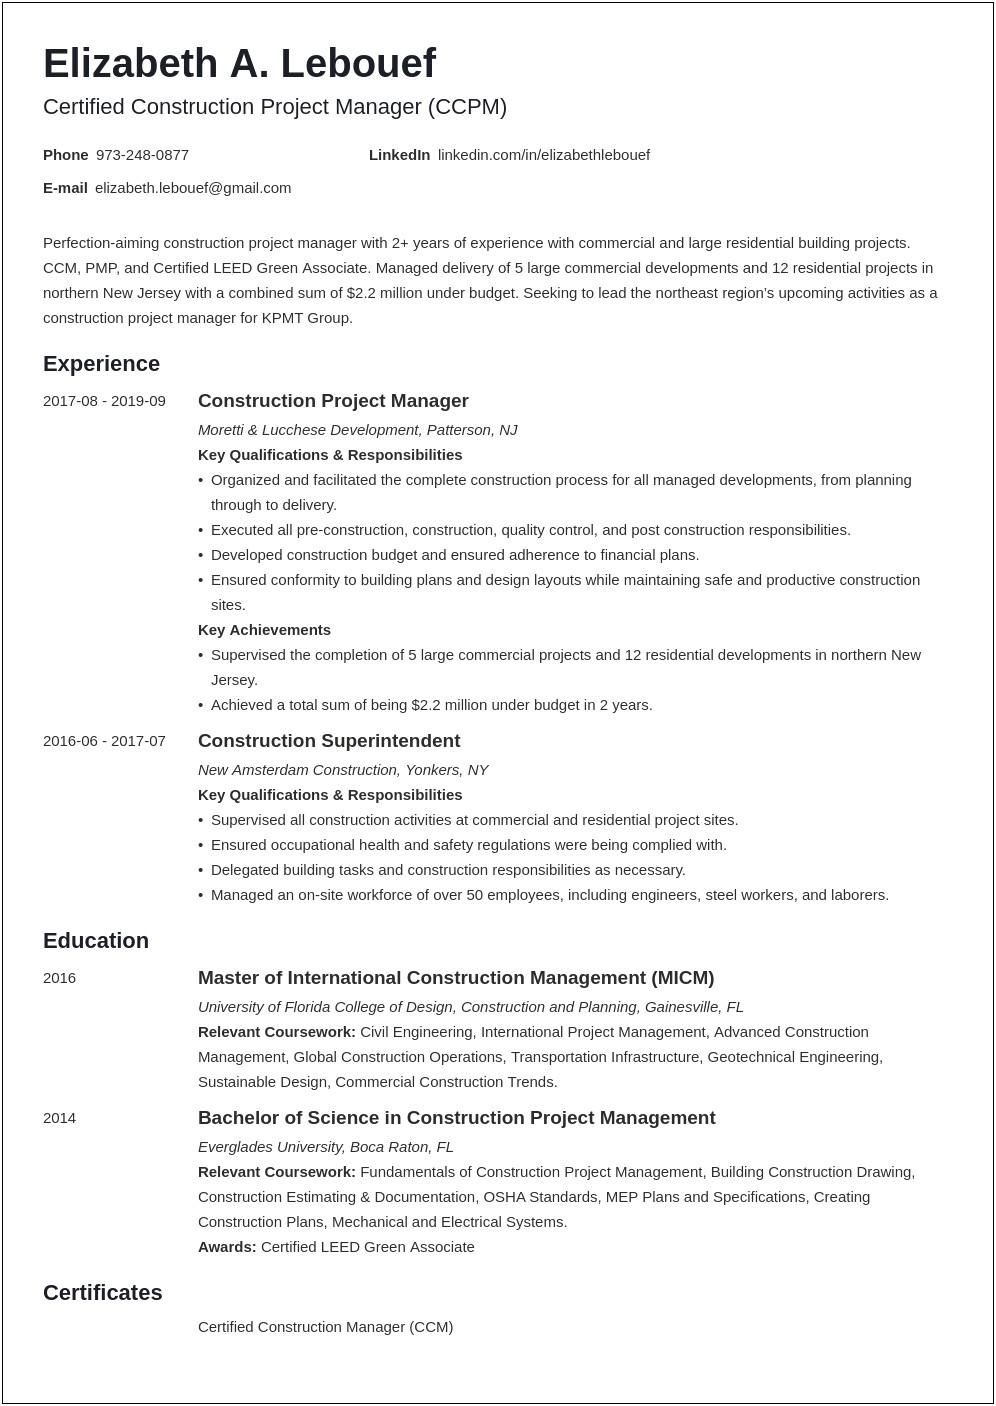 It Project Manager Resume Pdf India